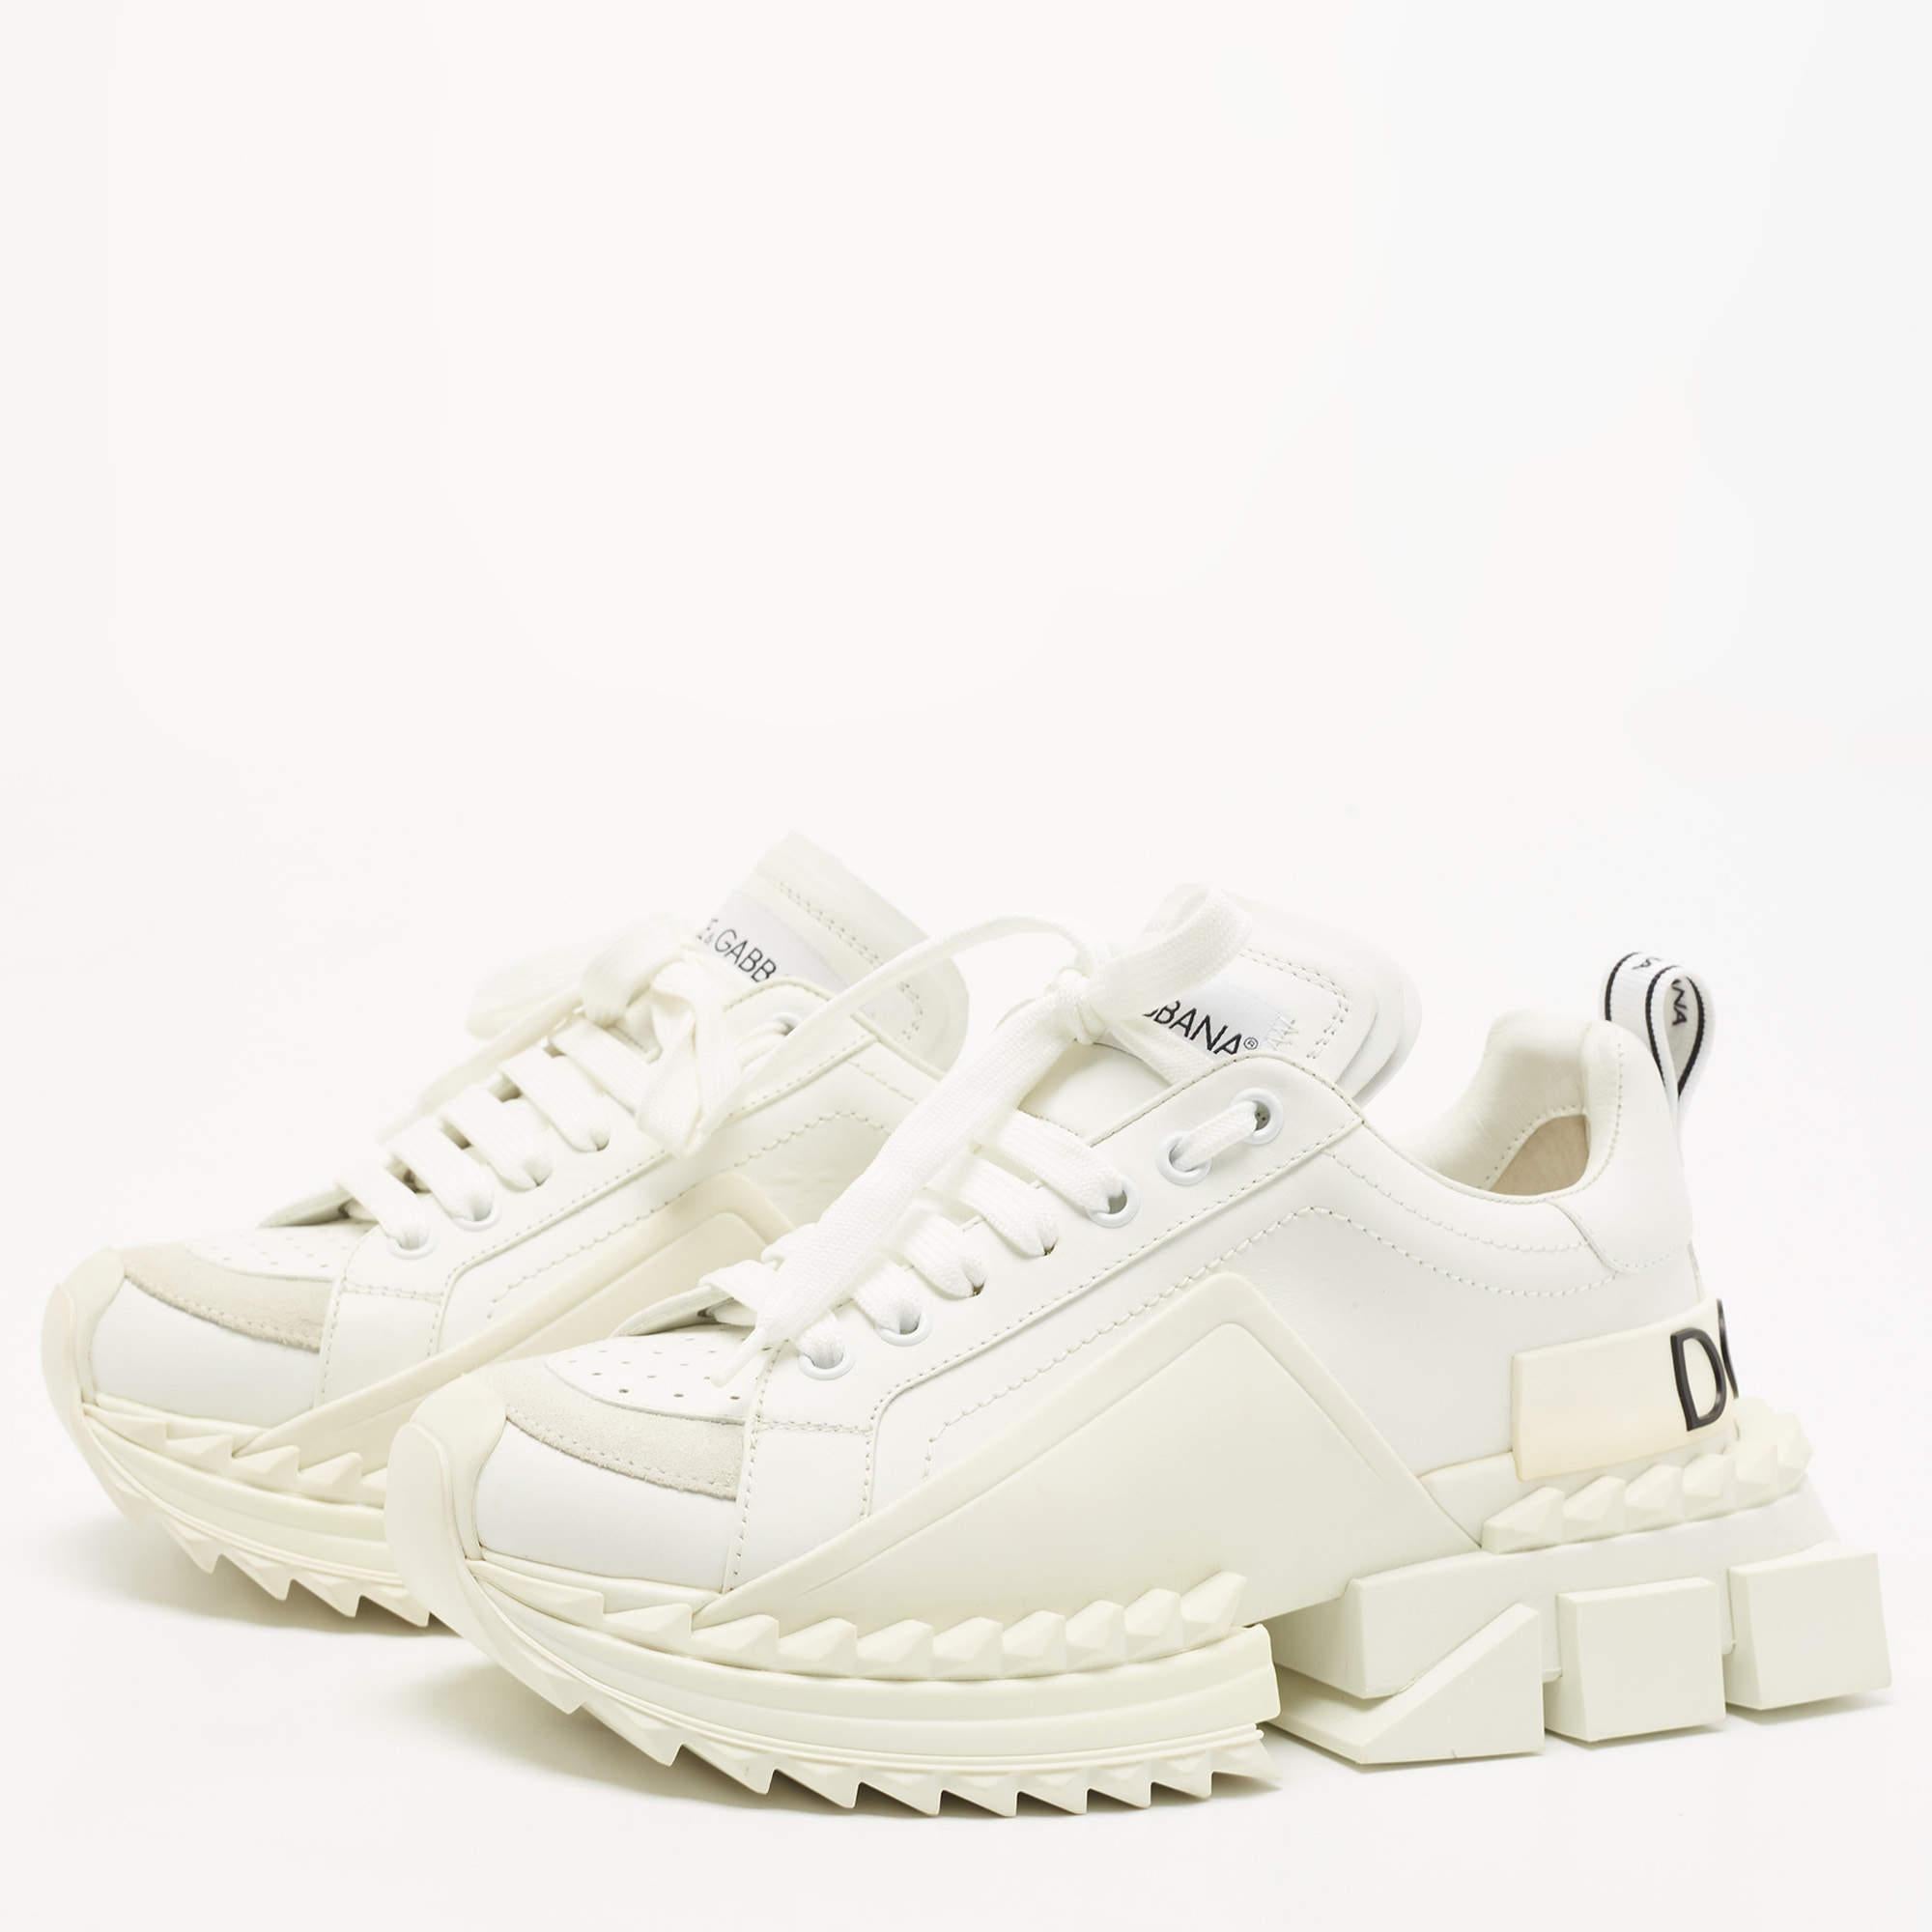 Add a statement appeal to your outfit with these sneakers. Made from premium materials, they feature lace-up vamps and relaxing footbeds. The rubber sole of this pair aims to provide you with everyday ease.

